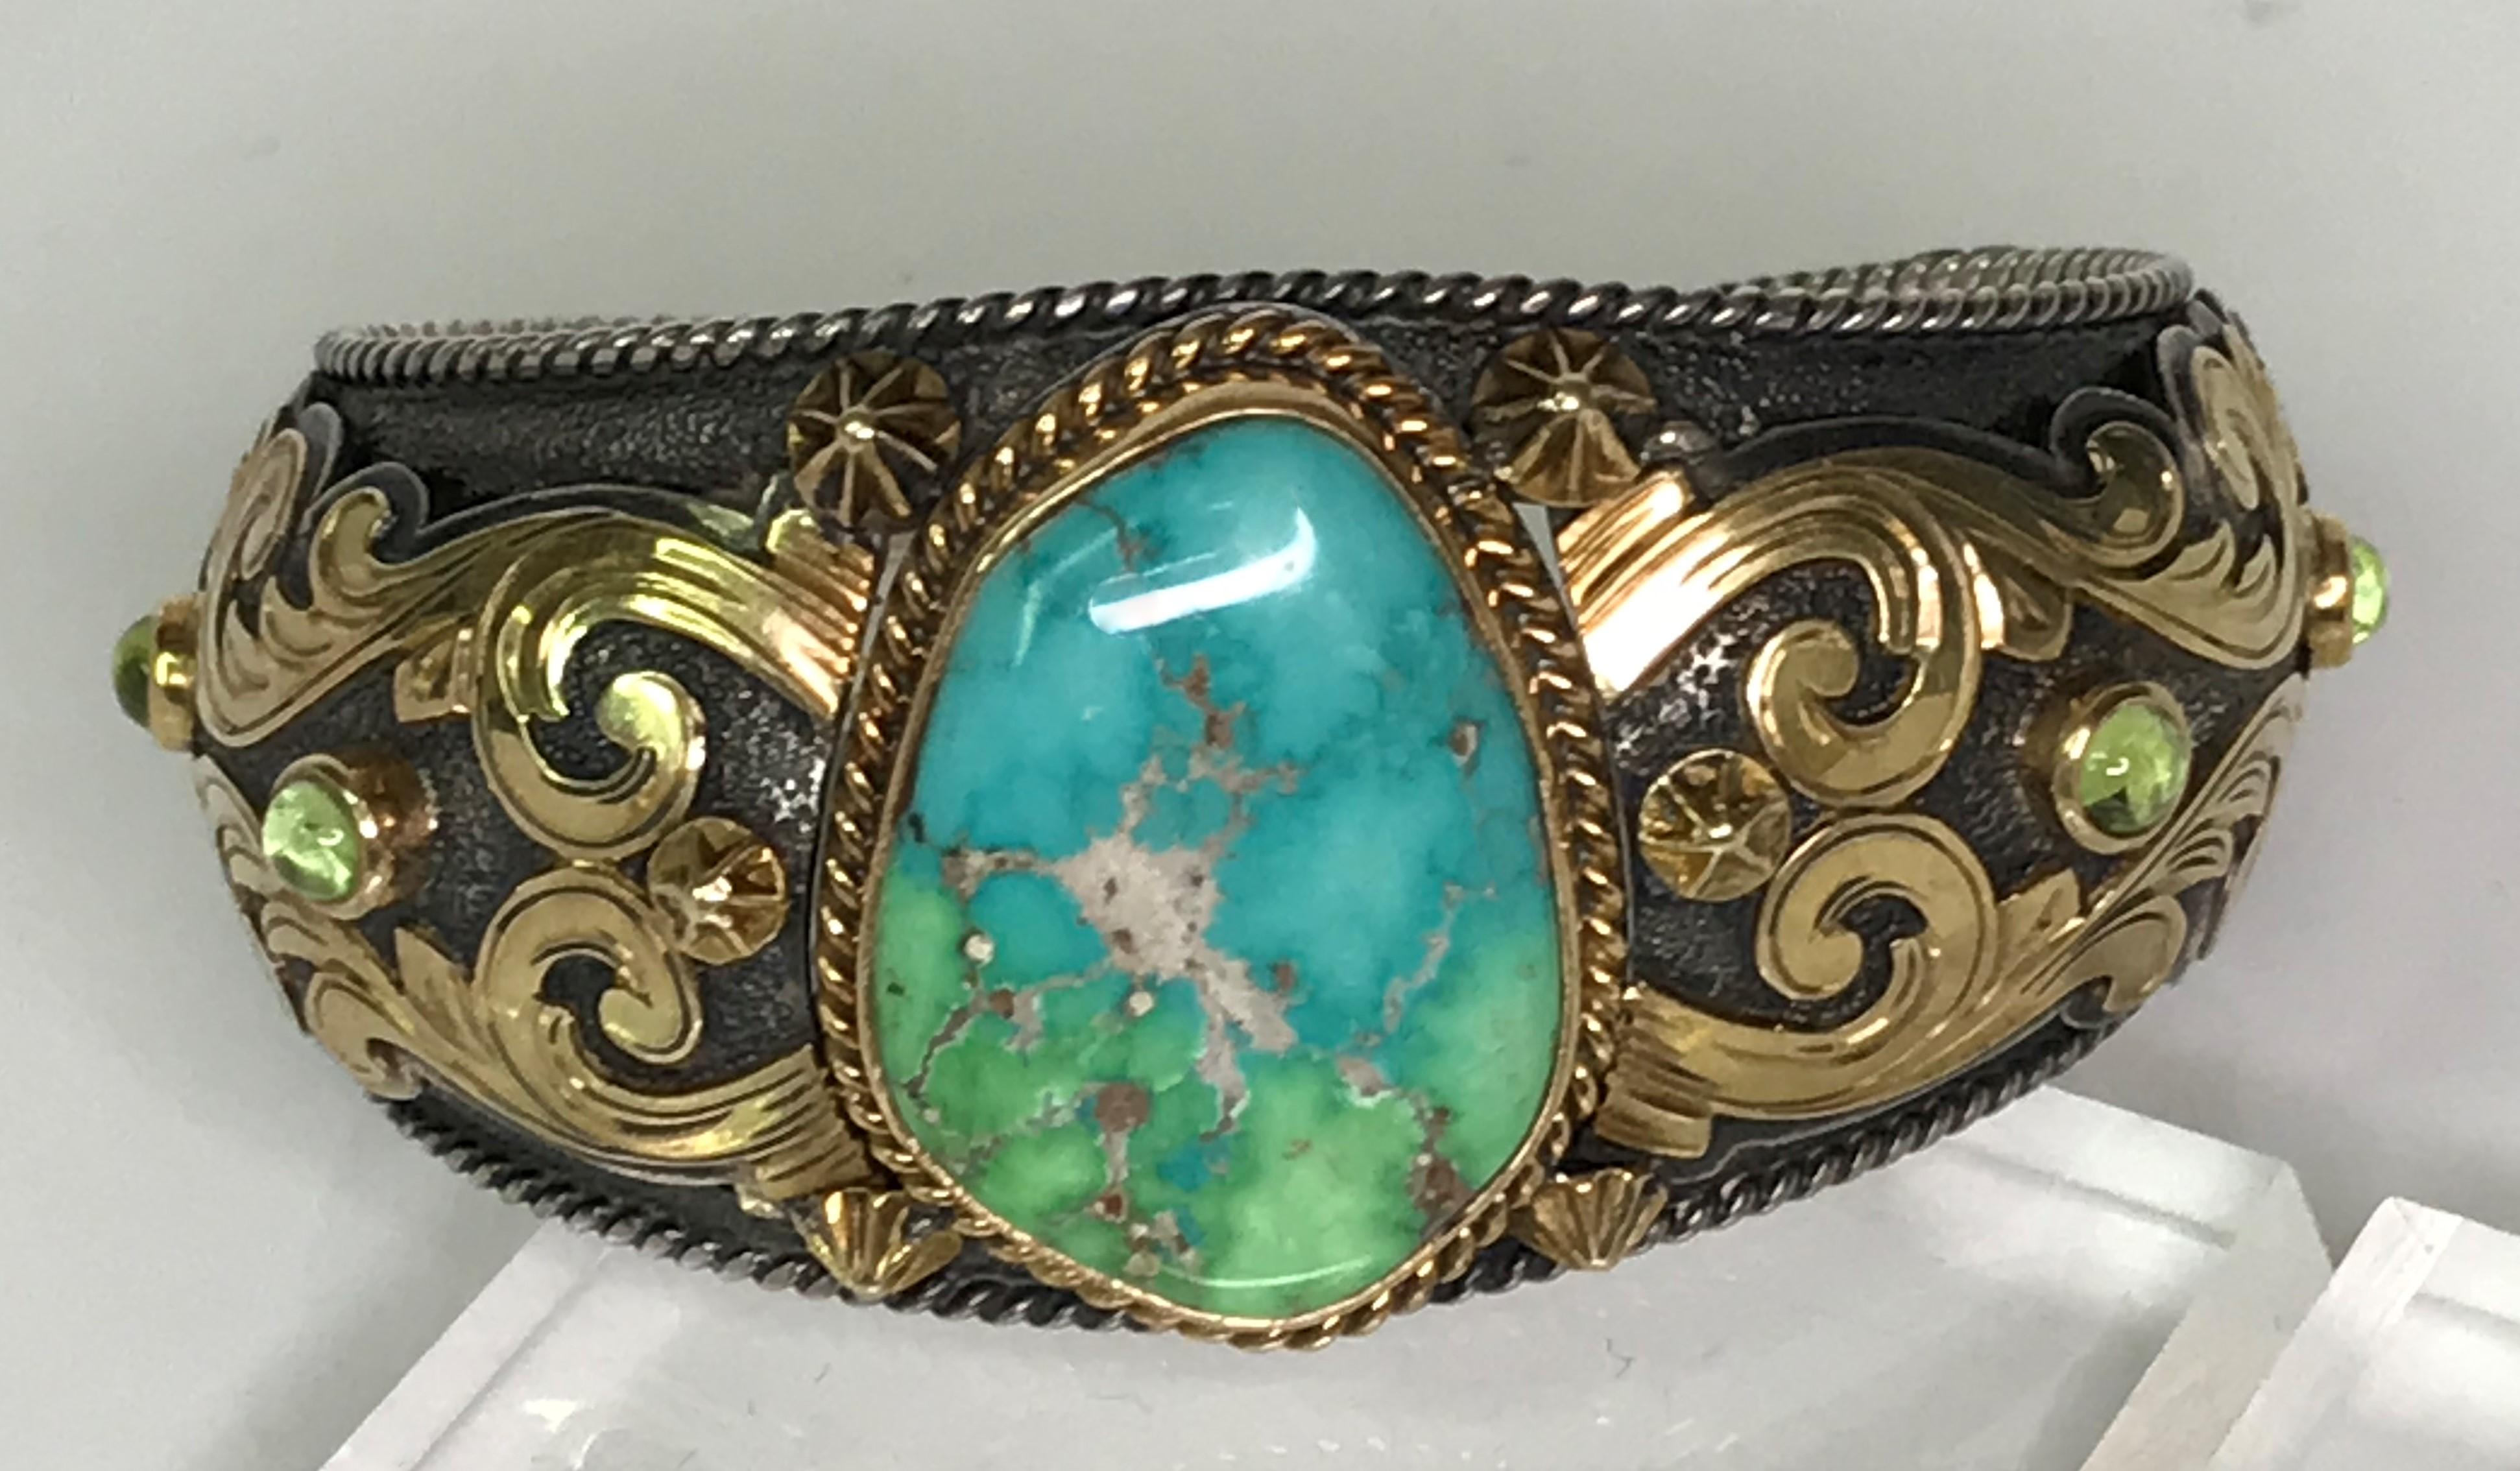 This one-of-a-kind bracelet will definitely get attention!
By designer Mona Van Riper, excellent craftsmanship and unique design.
18 karat yellow gold and sterling silver.
Center stone is a slightly oval, irregular shape turquoise with blue and